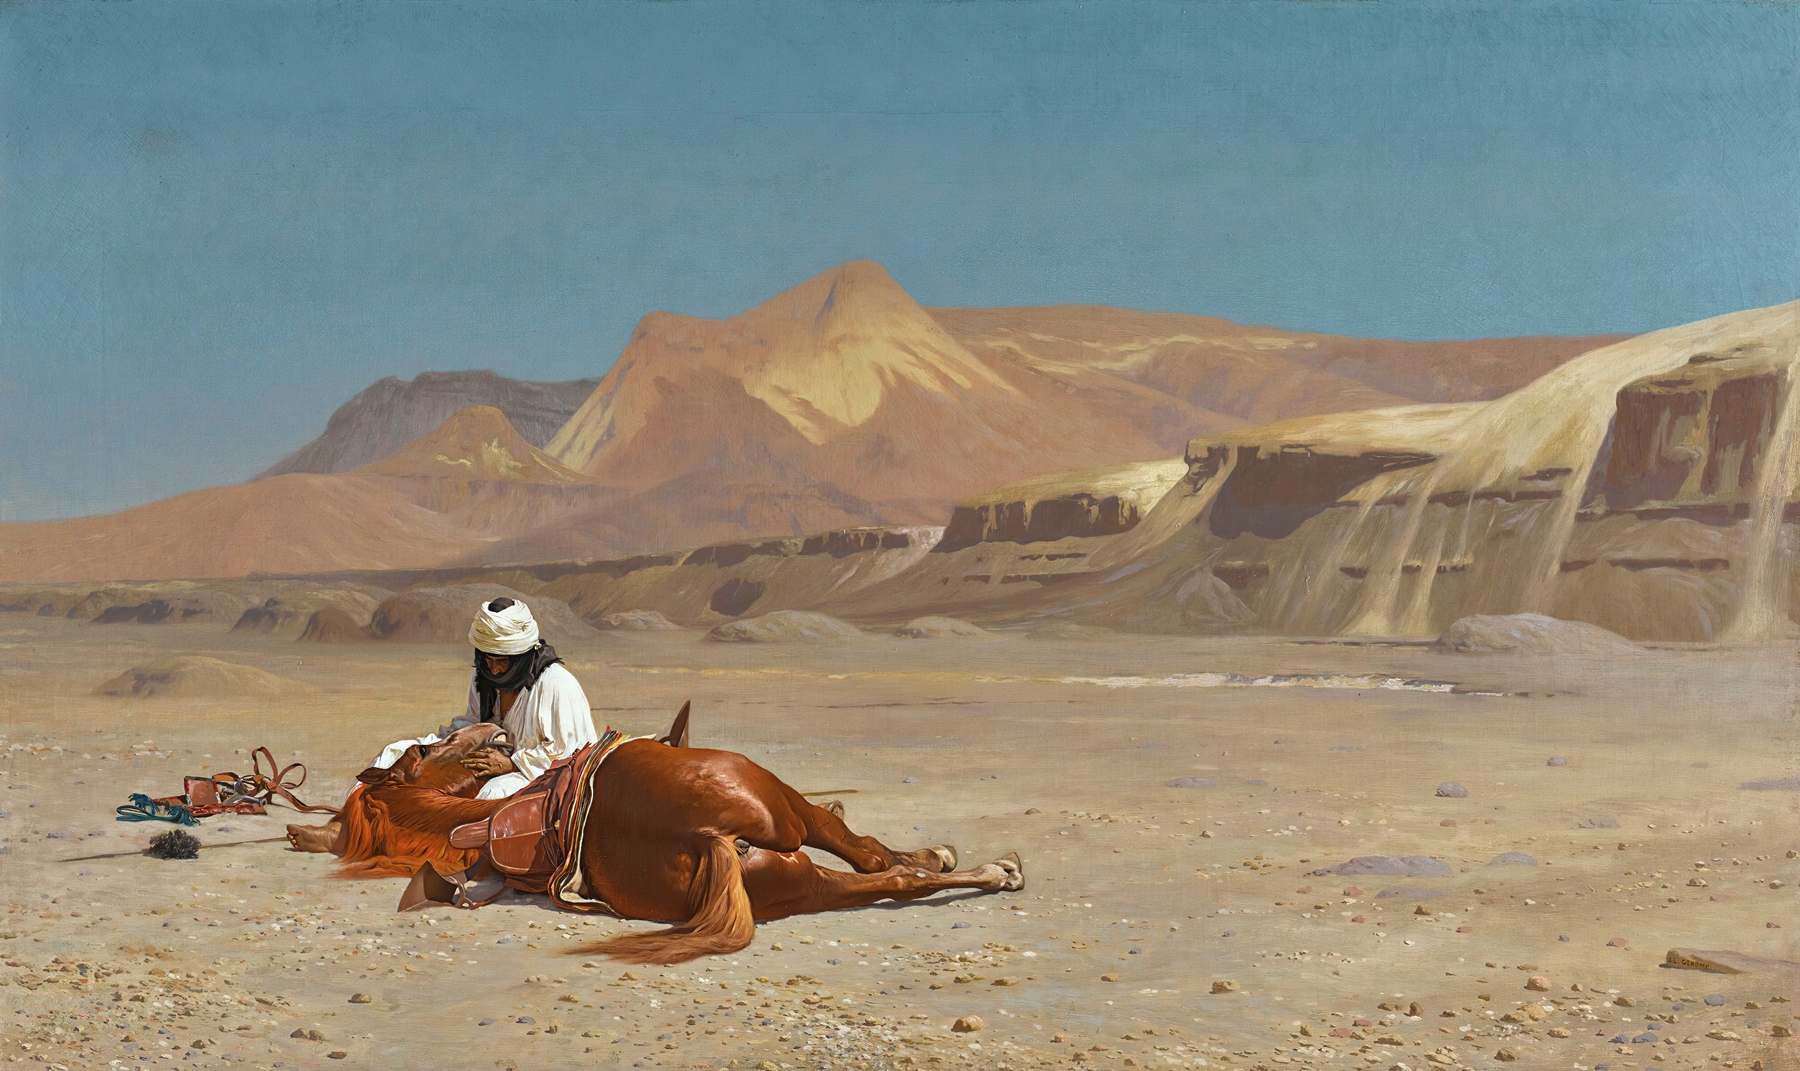 oil painting of an arab man caressing his horse in a desert landscape